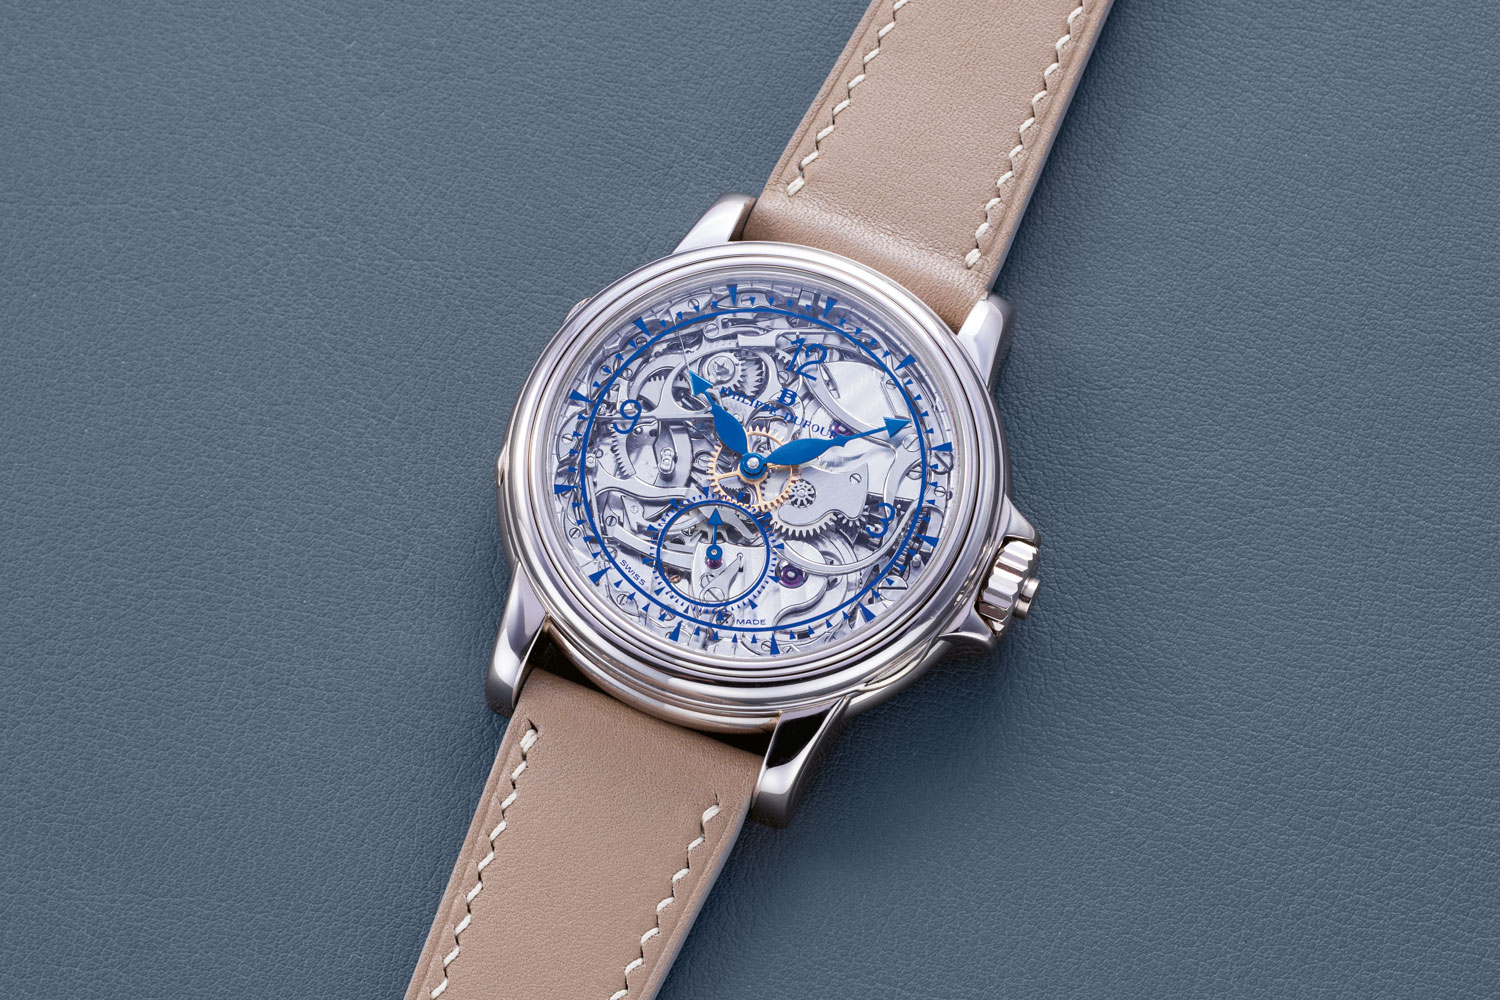 A unique Philippe Dufour Grande Sonnerie in white gold with a clear sapphire dial showcasing the beautifully finished striking mechanism. (Image :The Hour Glass)